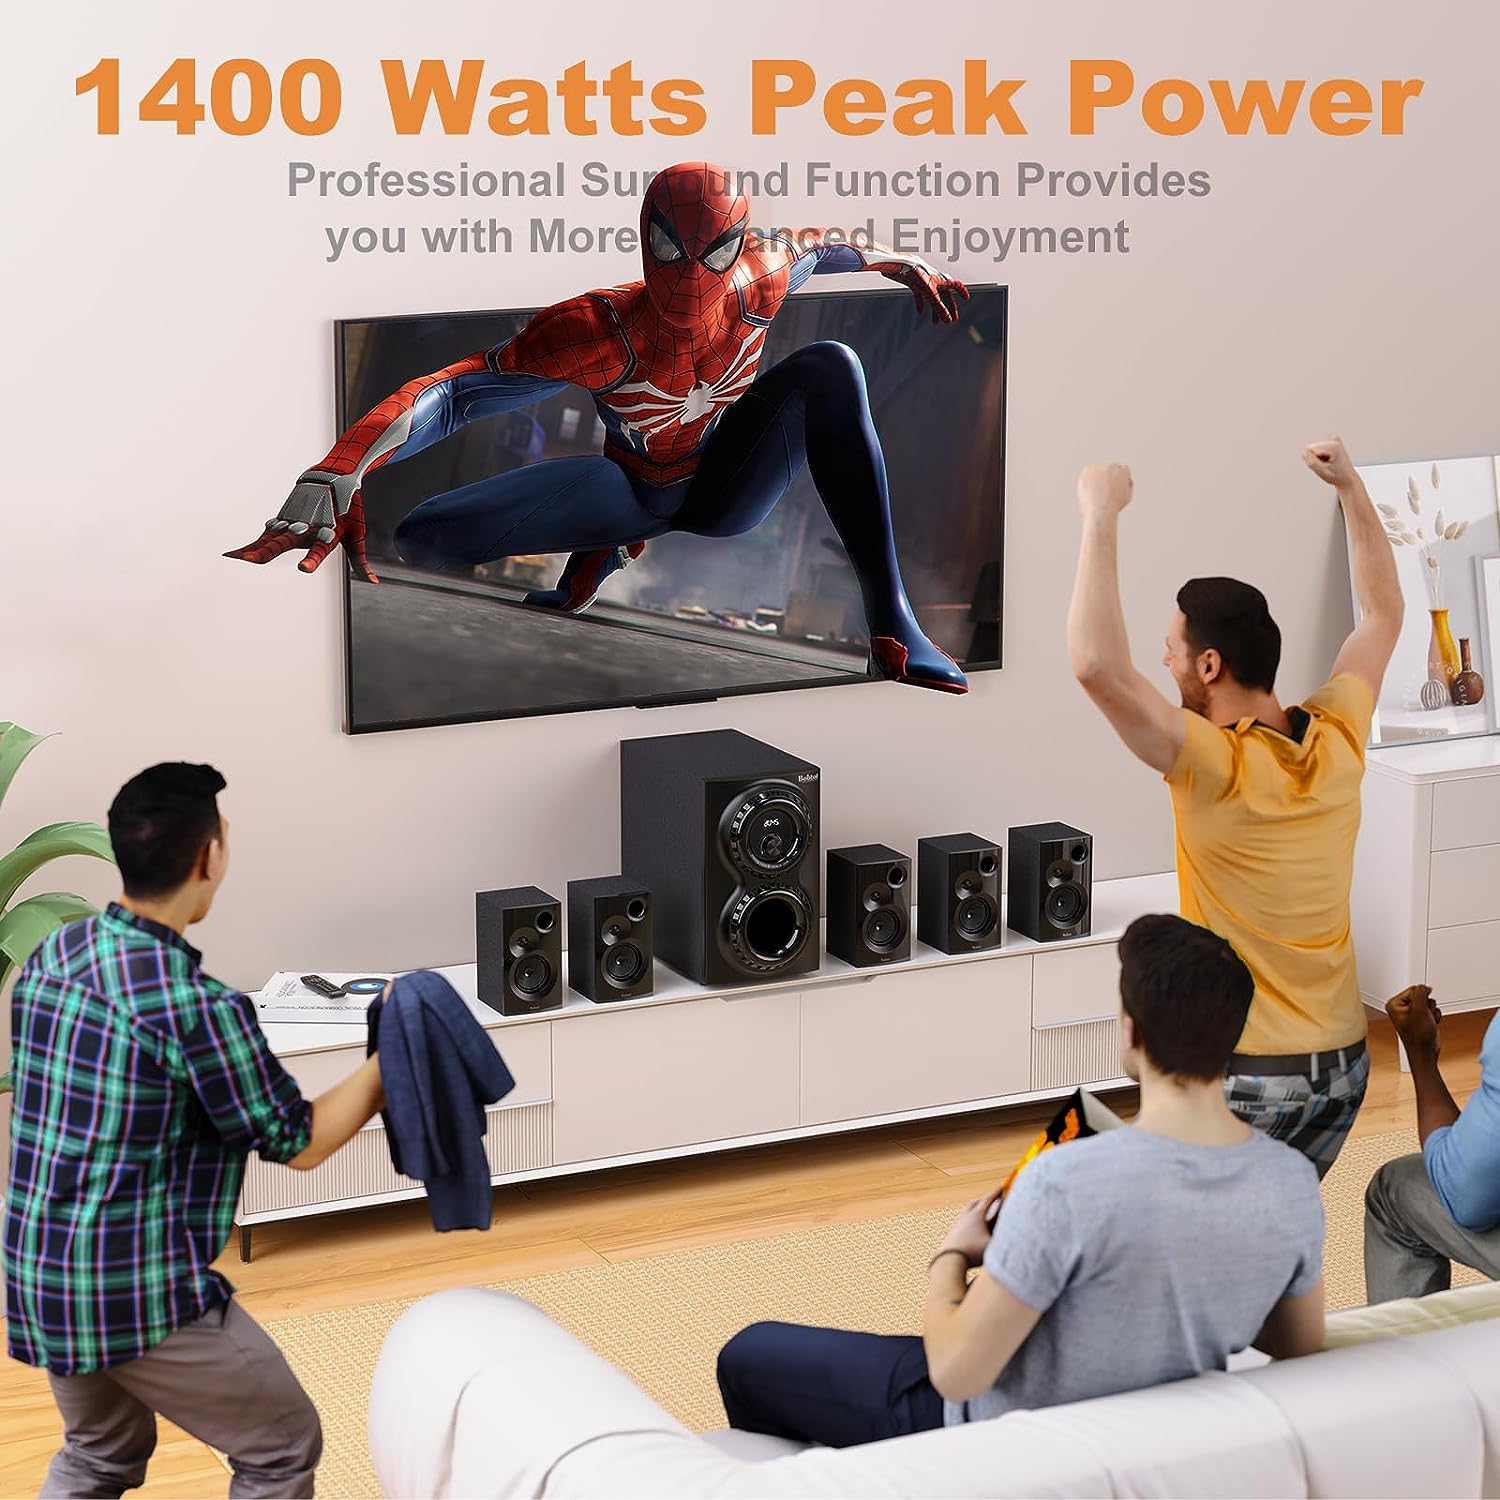 Bobtot Surround Sound Systems Home Theater Speakers - 1400 Watts 12